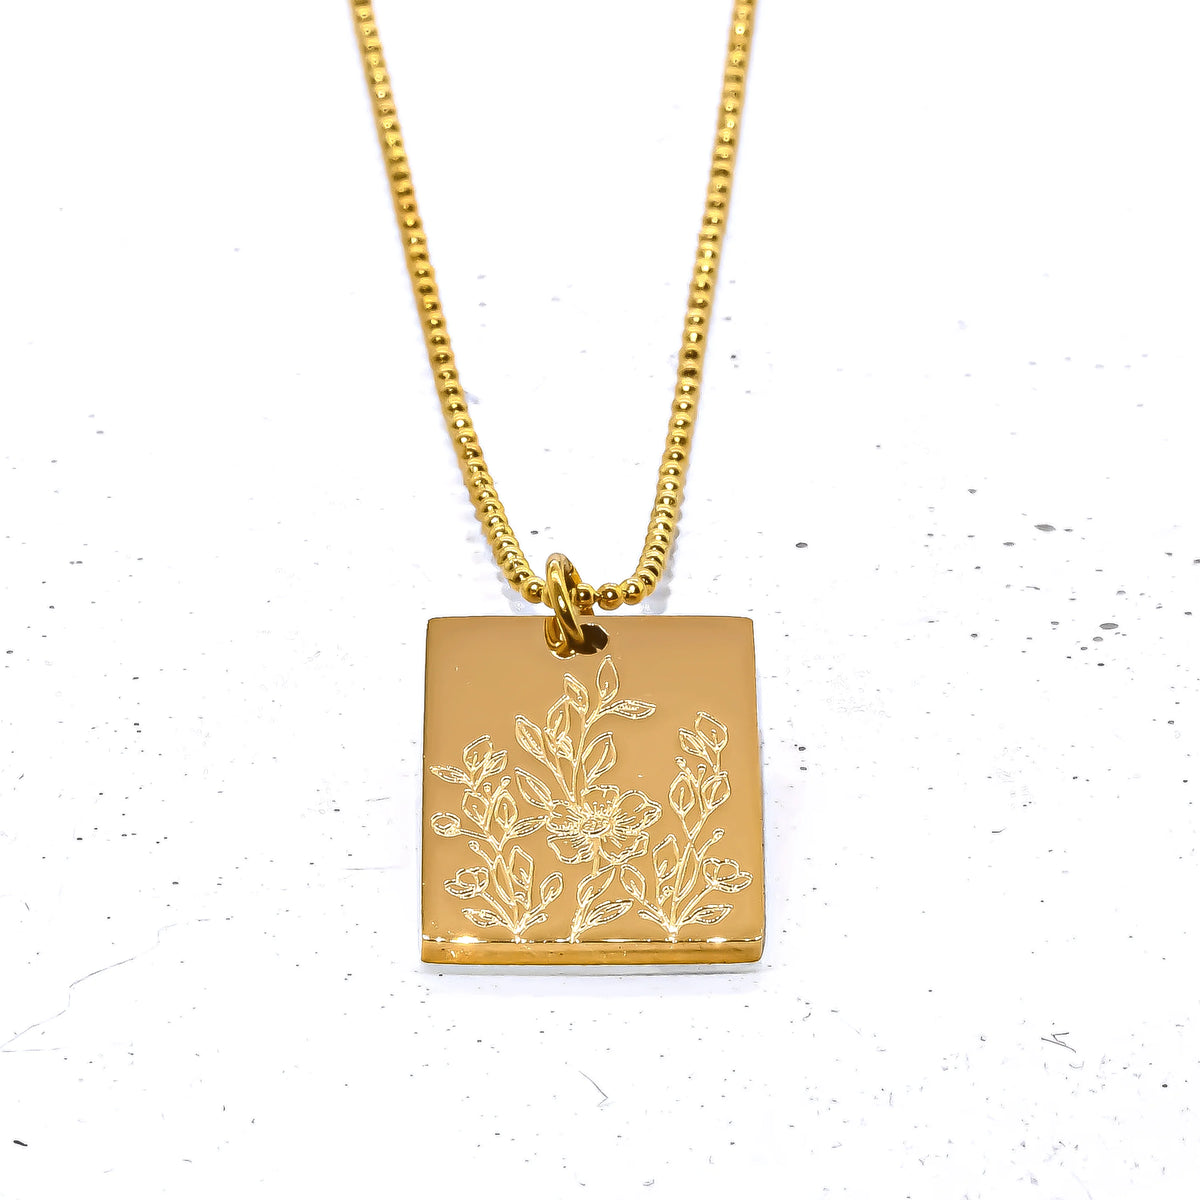 She is a Wildflower Gold Necklace